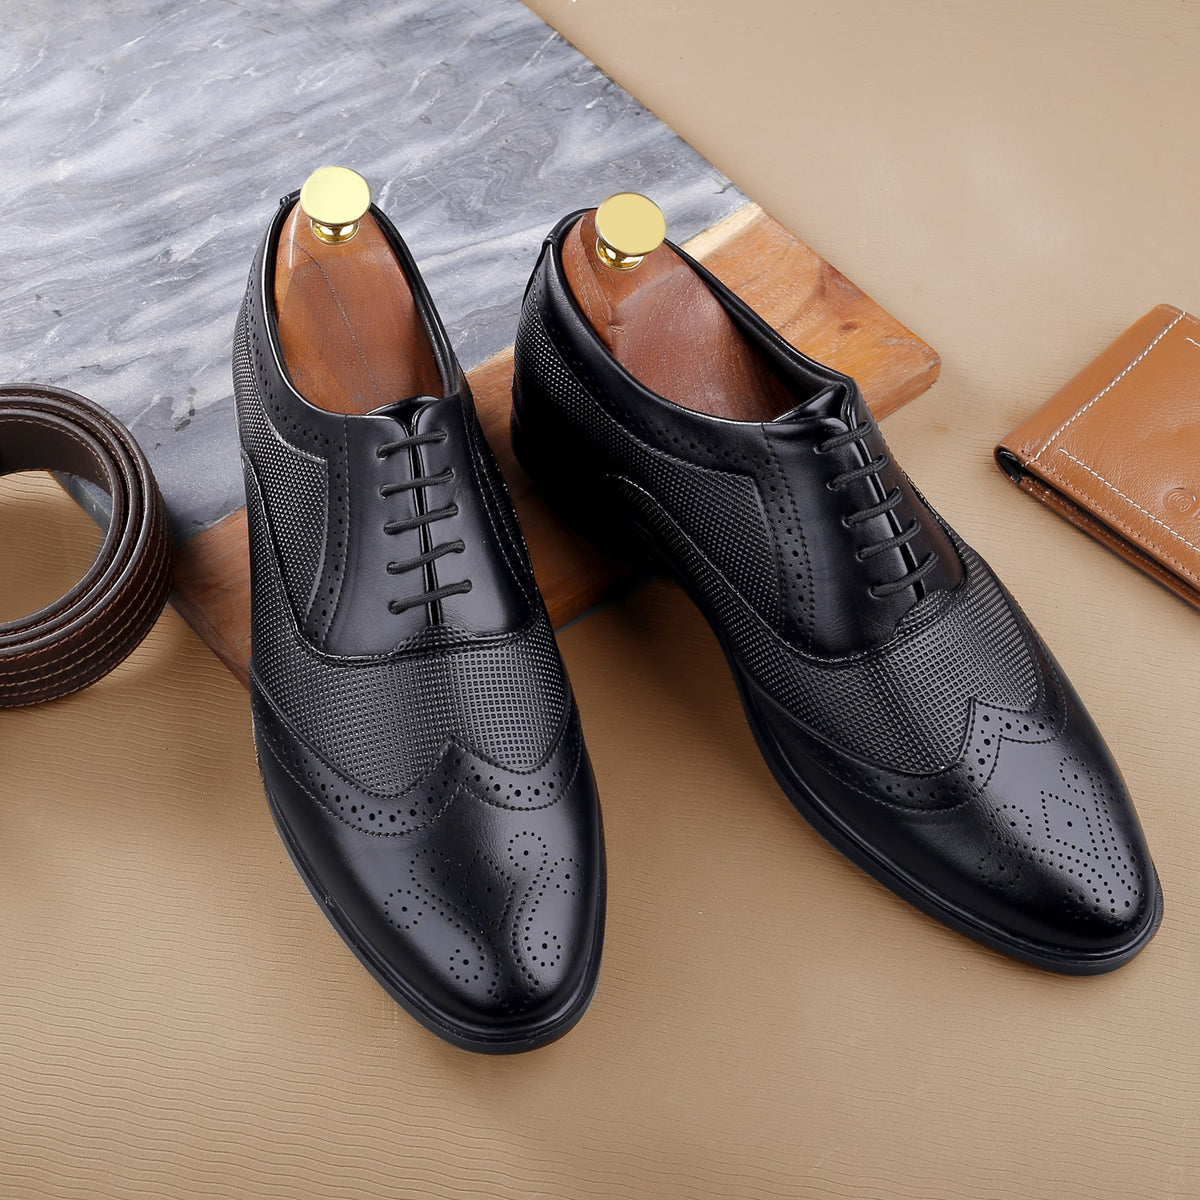 Bacca Bucci VICTORIA Formal Shoes with Superior Comfort | All Day Wear Office Or Party Lace-up Shoes